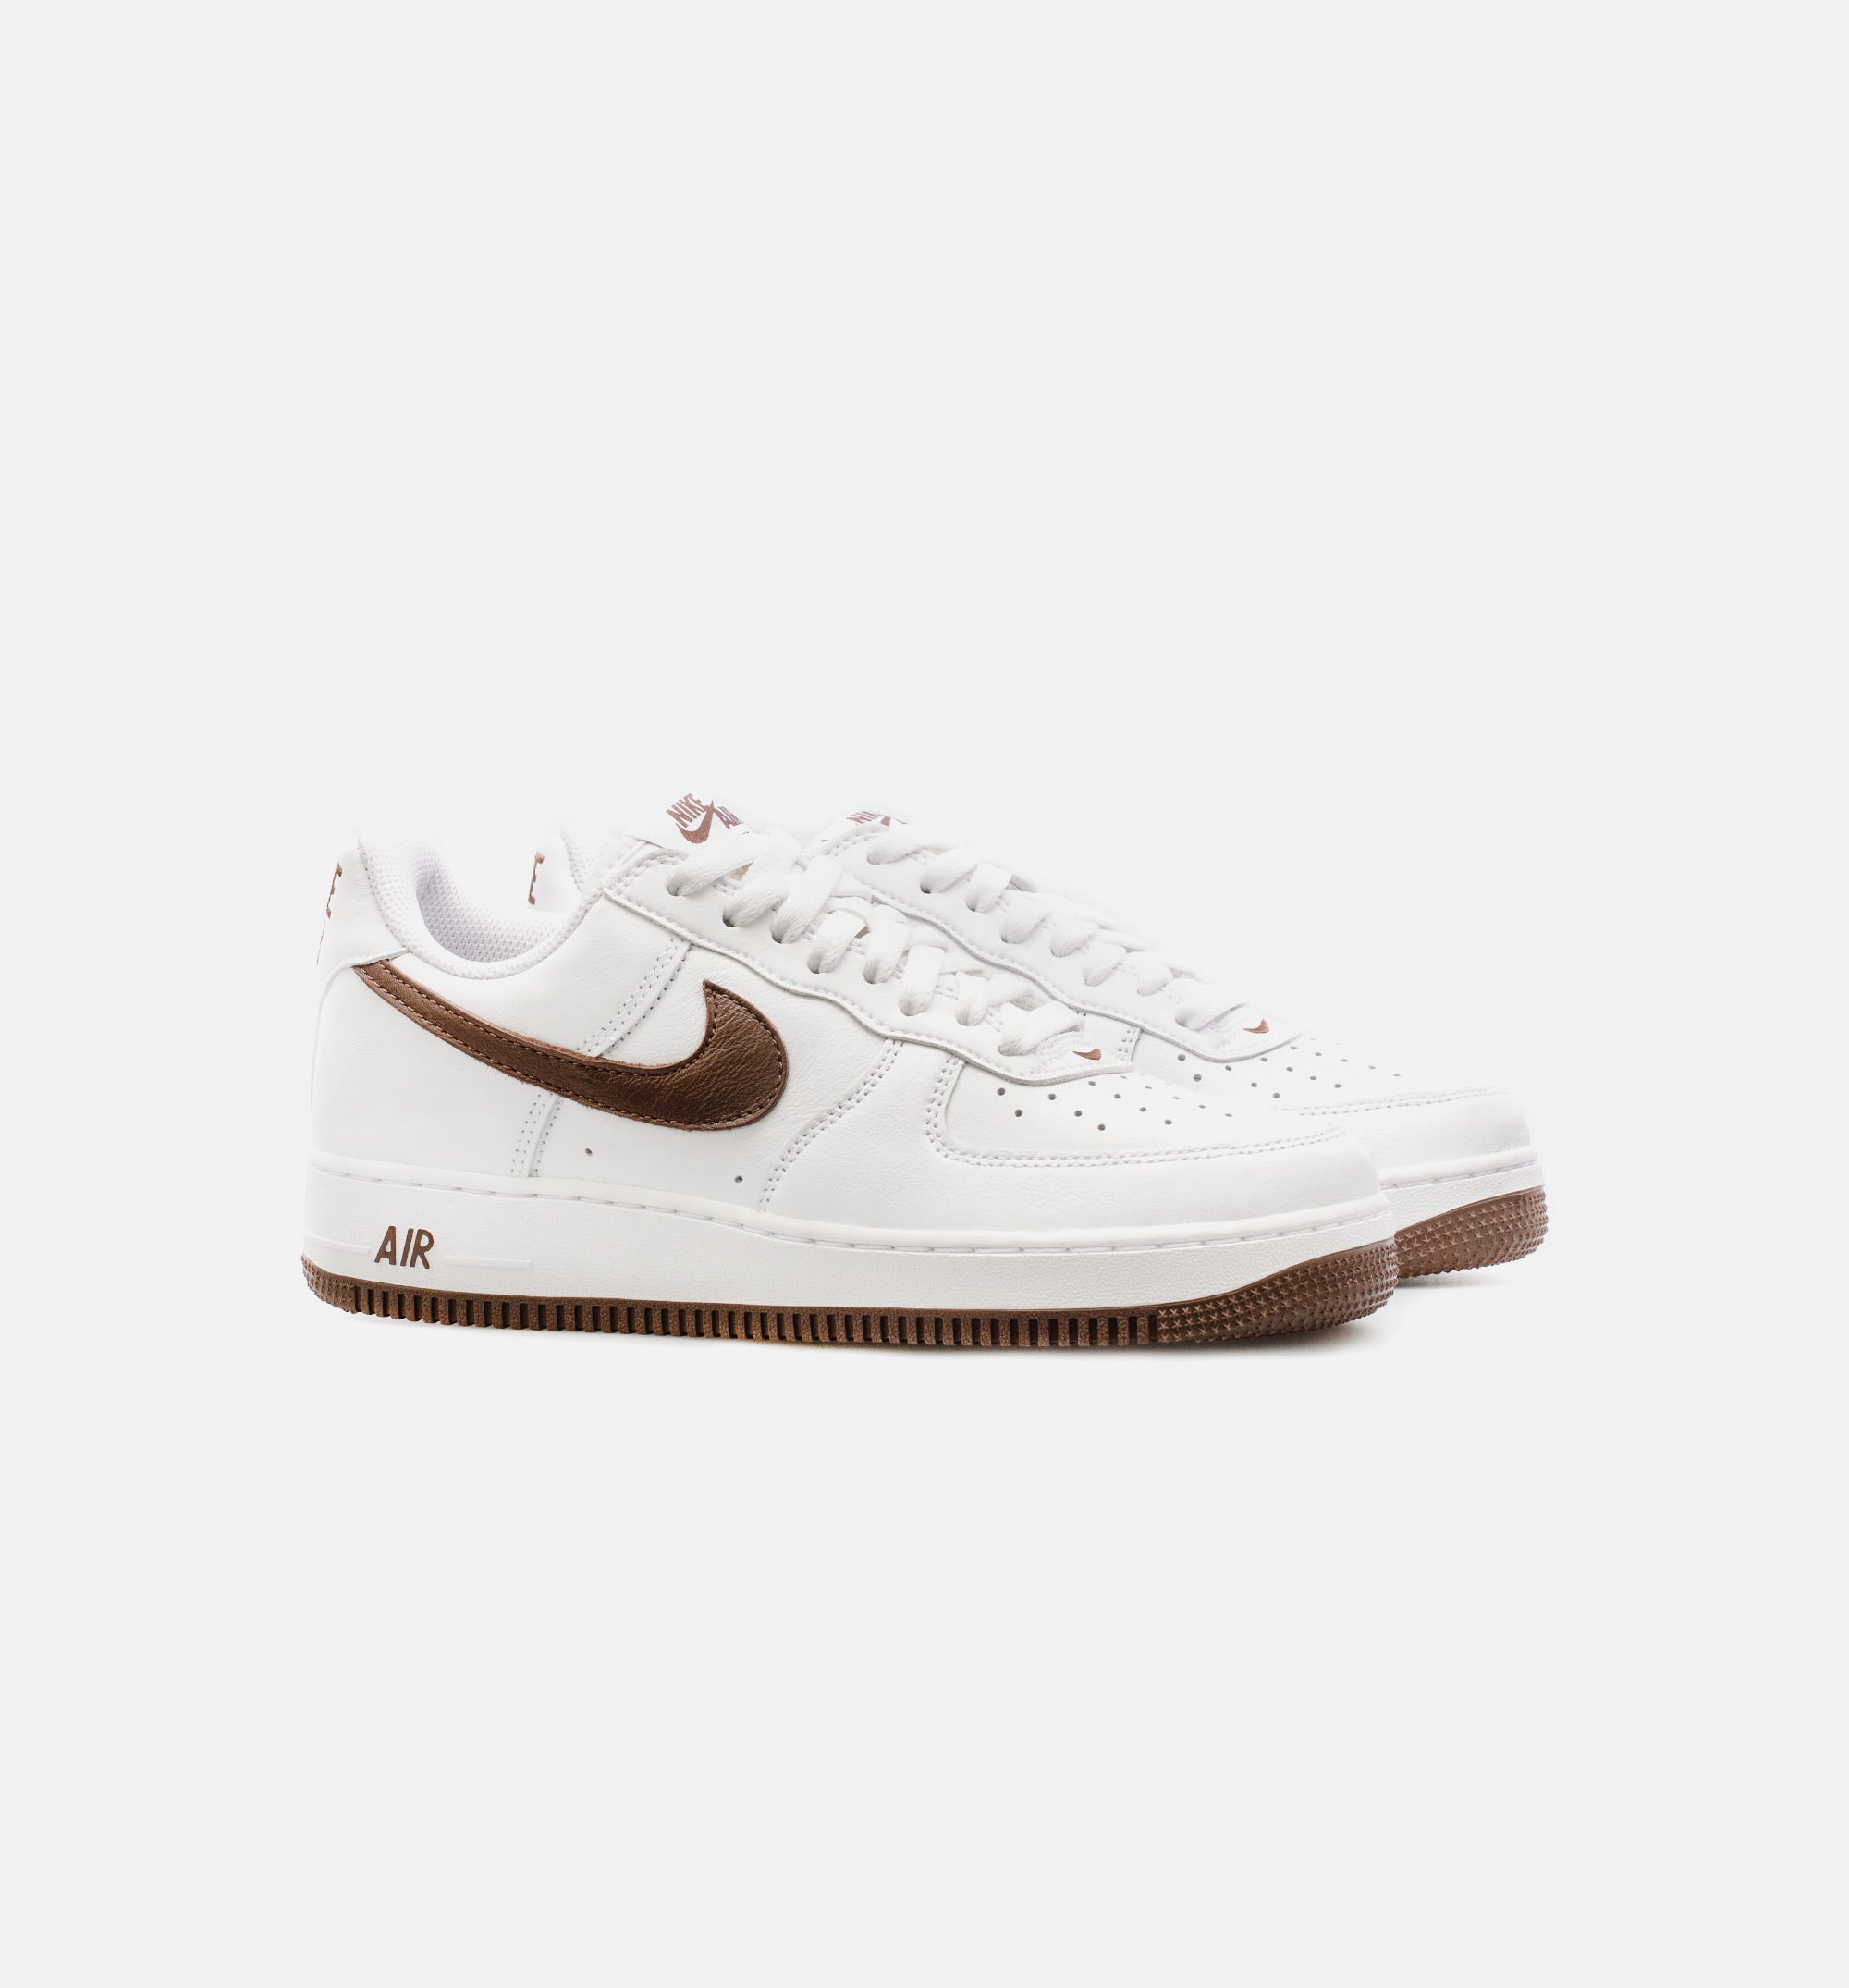 Nike DM0576-100 Air Force 1 Low White Chocolate Mens Lifestyle Shoe - White/ Brown –